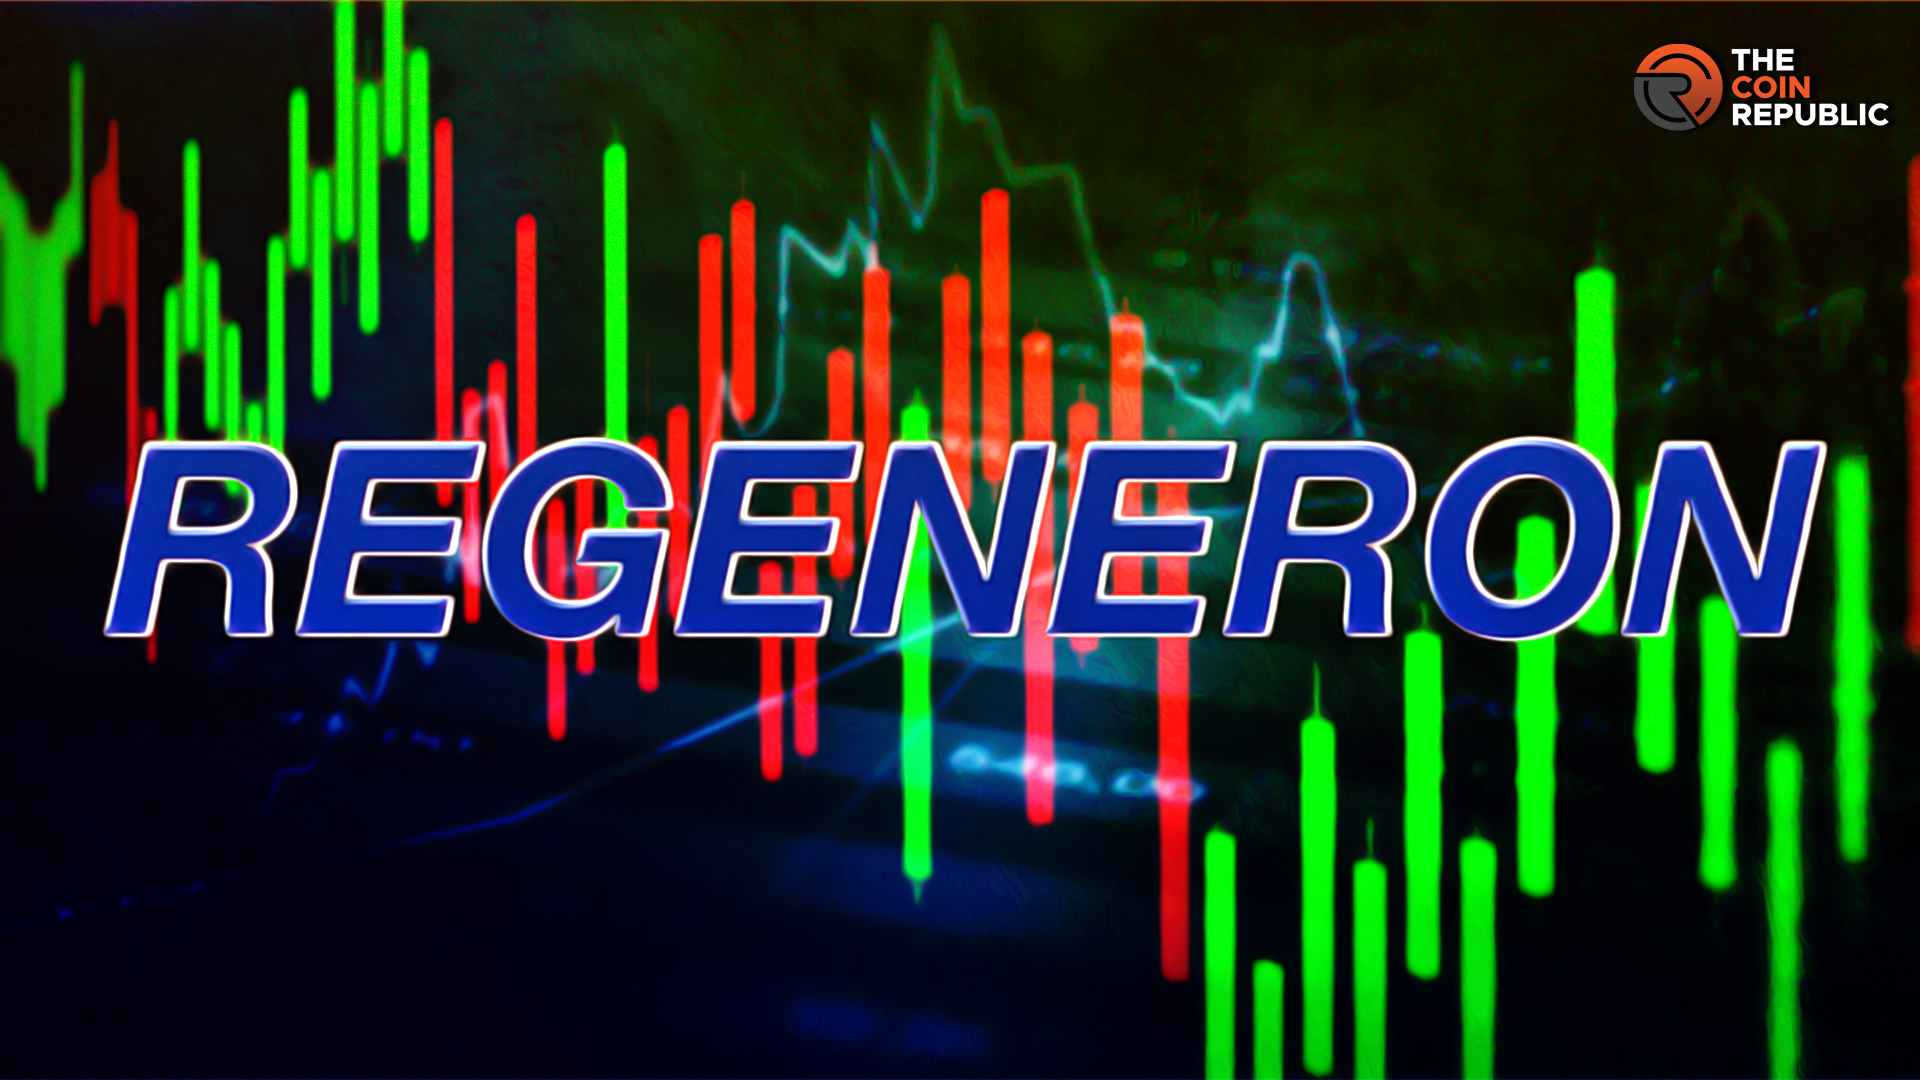 Quarterly Reports on the Driver’s Seat, the RGEN Stock surged 16%